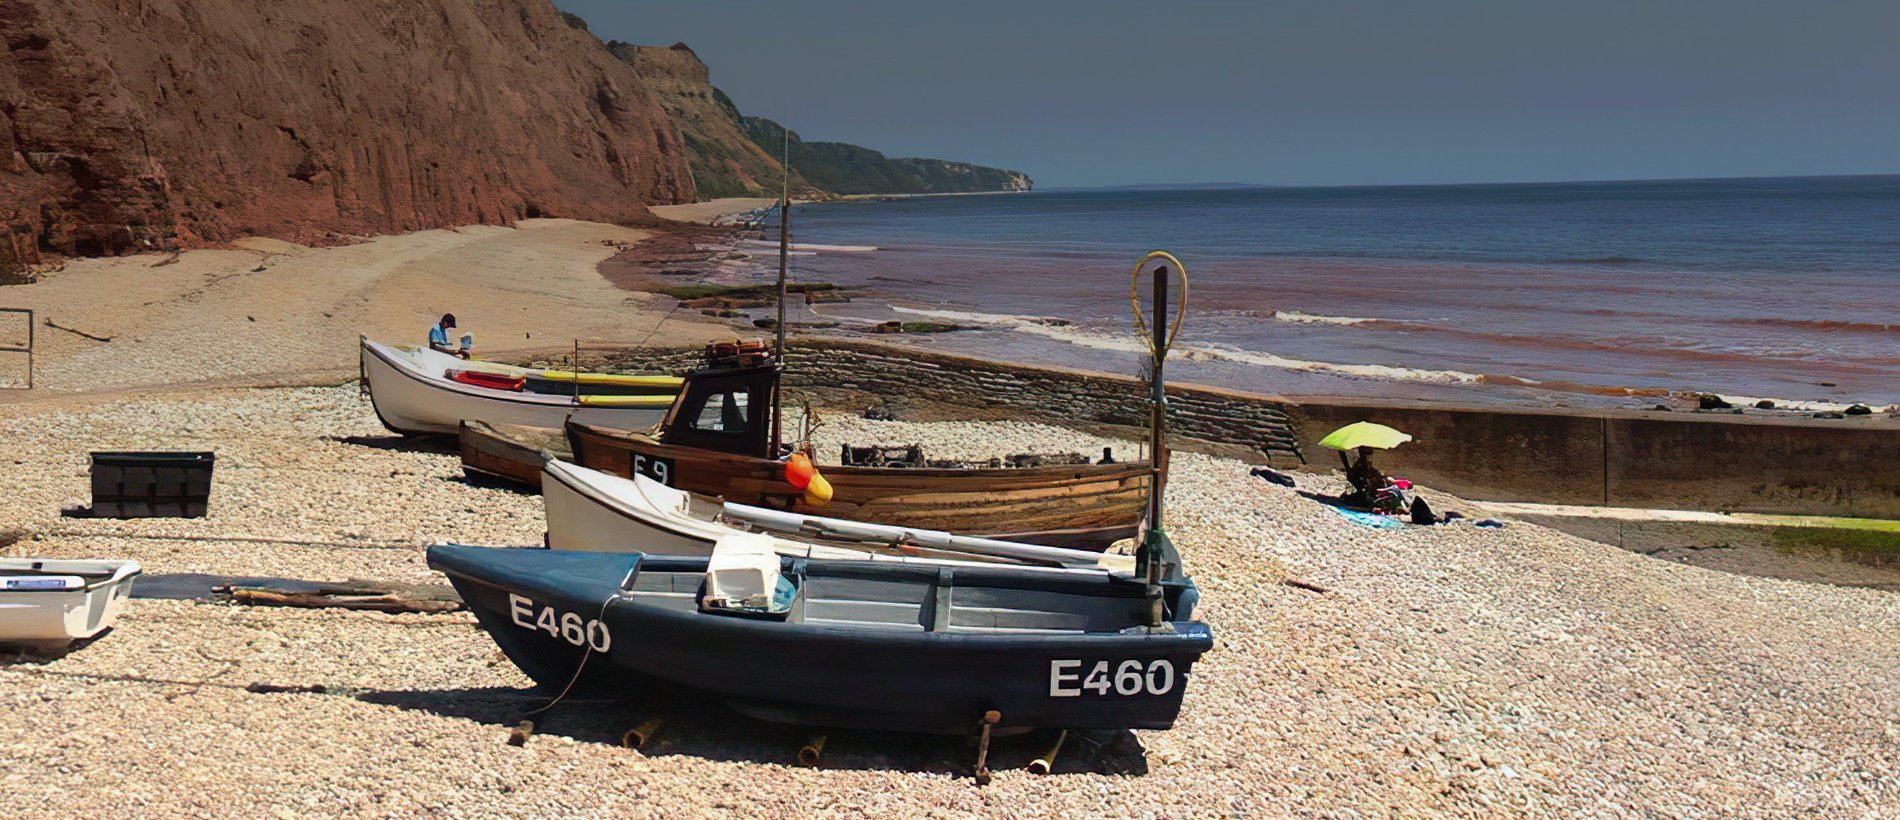 Sidmouth Beac, Home of Apollonia Dental Practice